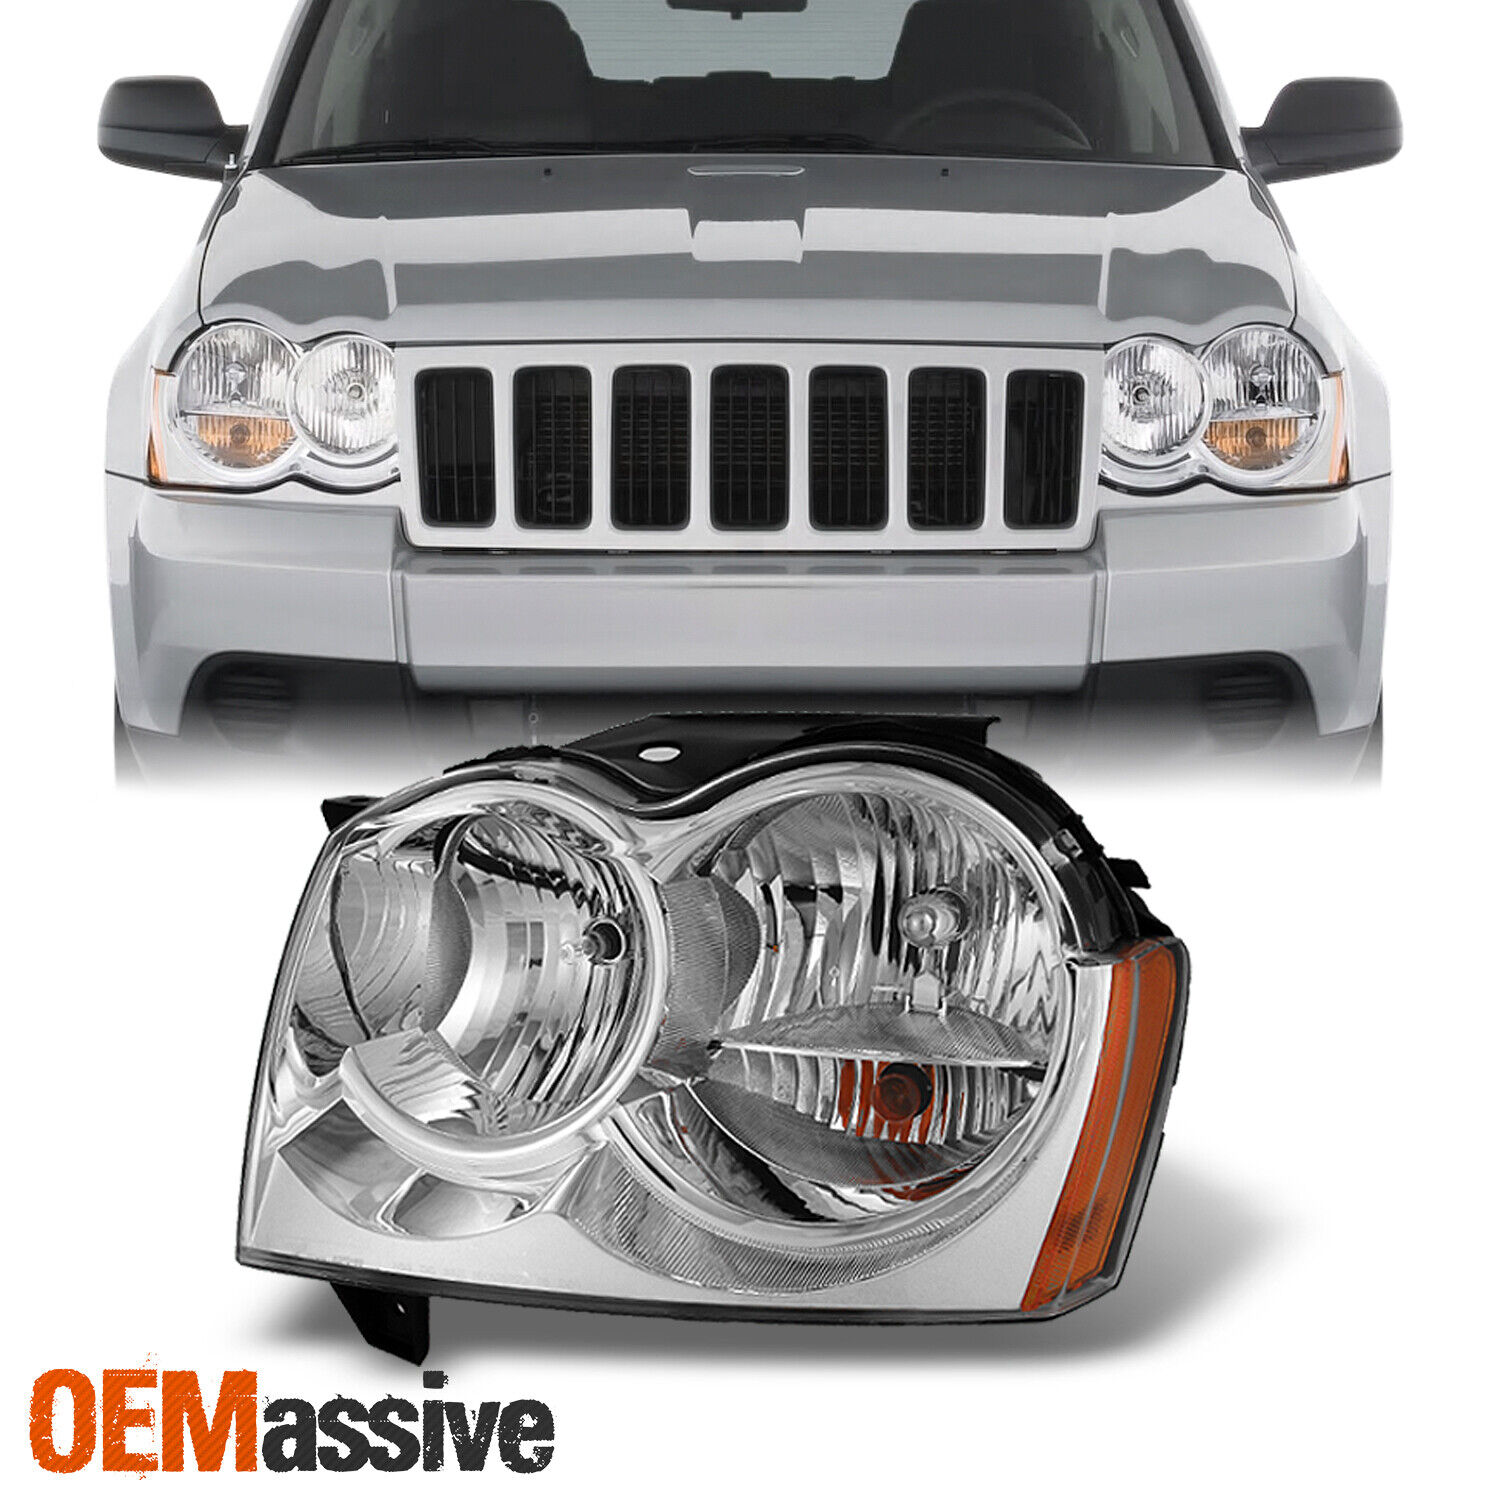 Fit 2005 2006 2007 Jeep Grand Cherokee Driver Left Side Clear Headlight Headlamp